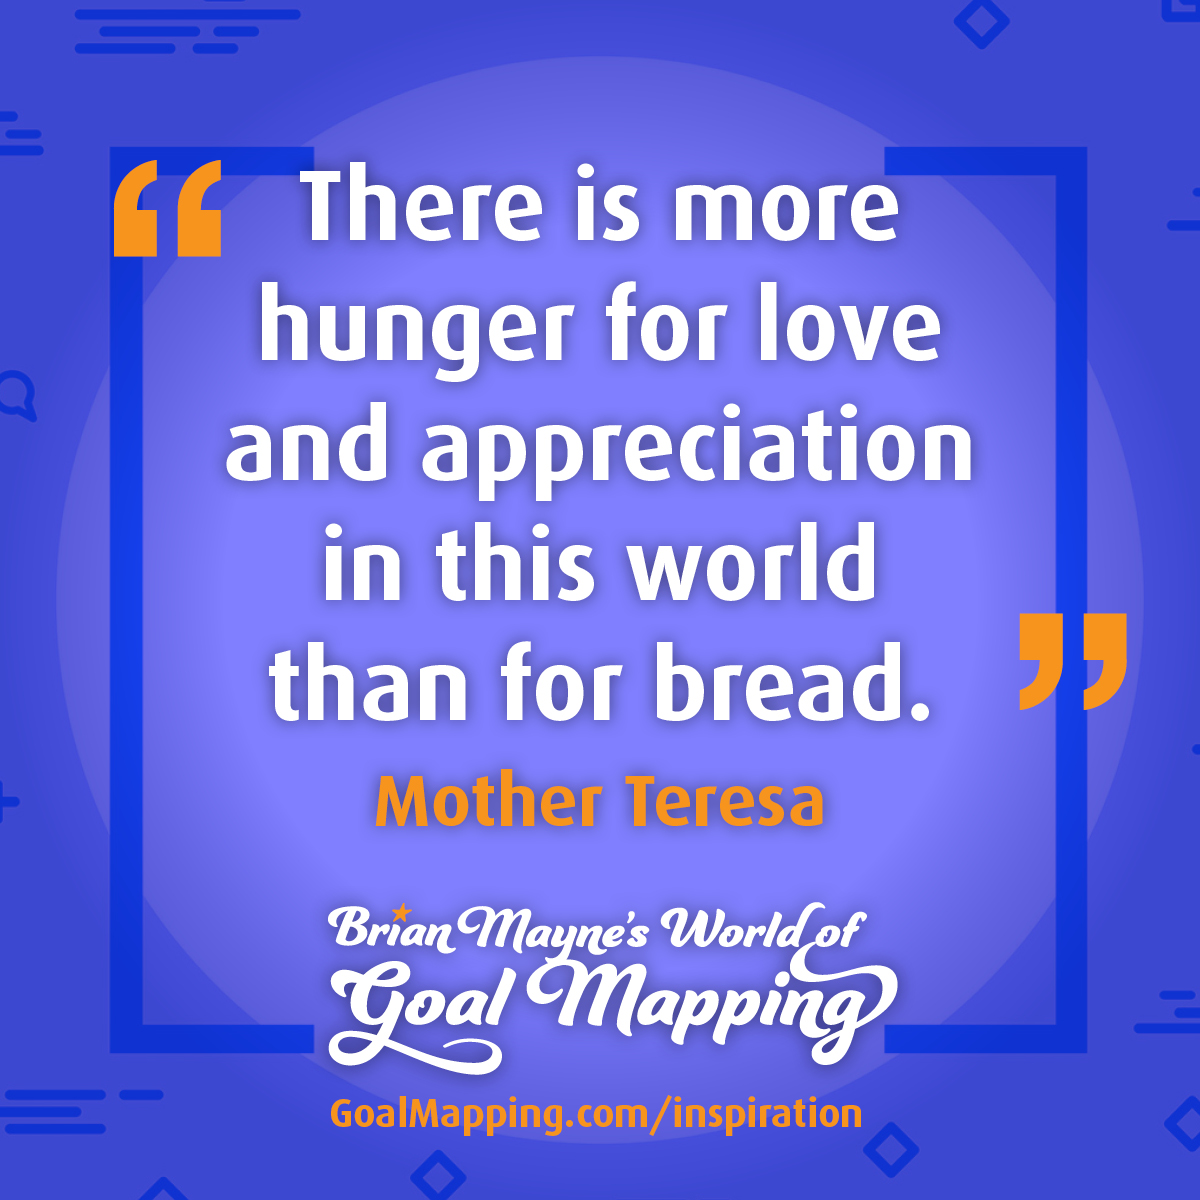 "There is more hunger for love and appreciation in this world than for bread." Mother Teresa